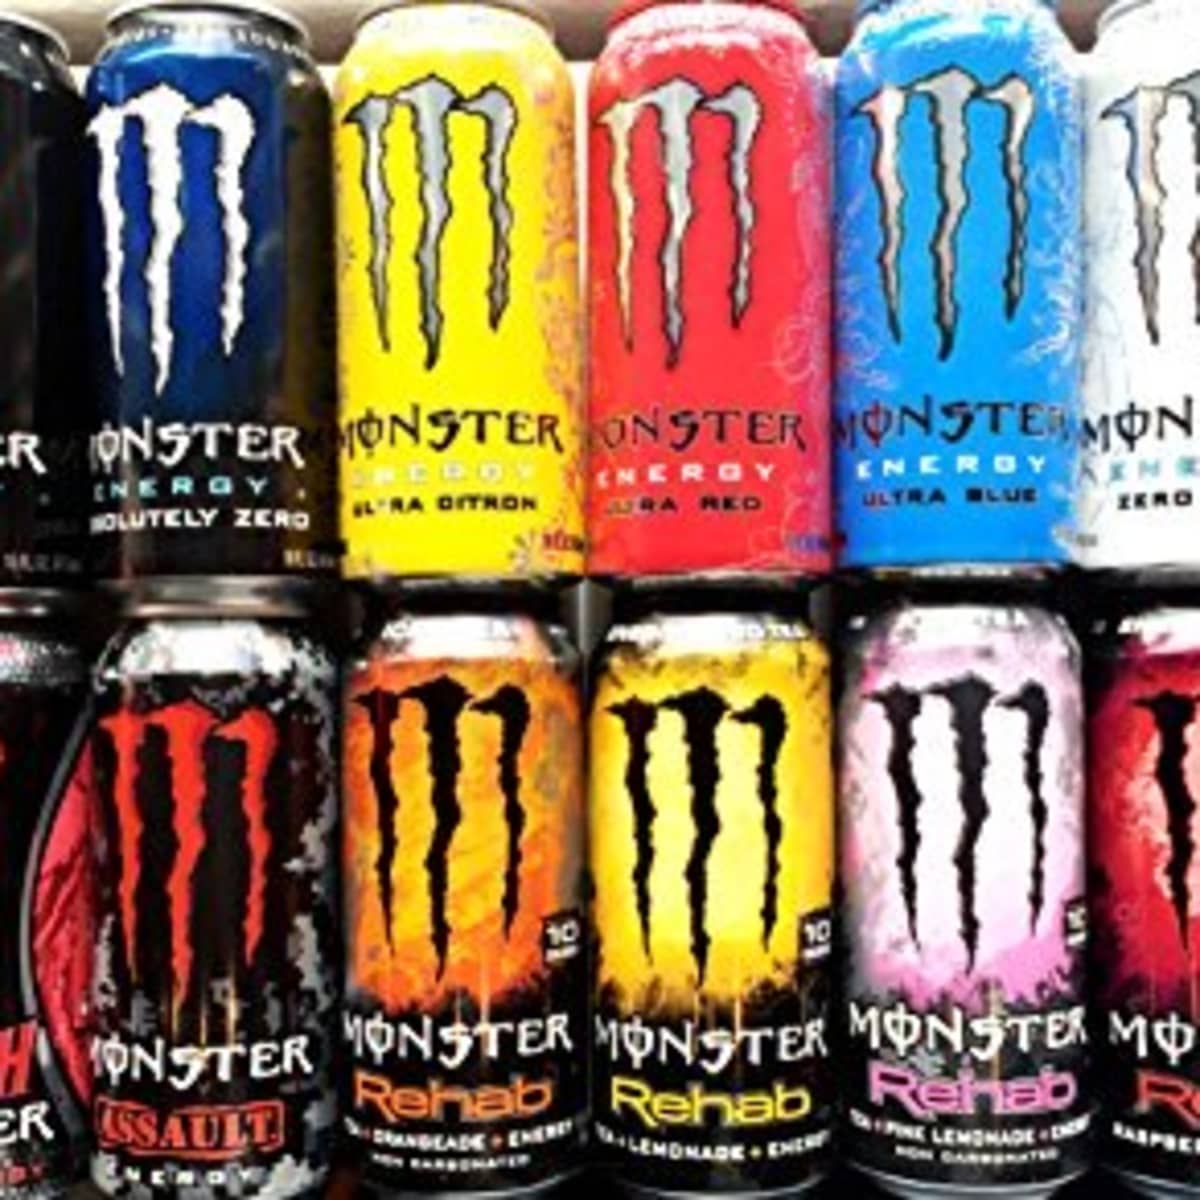 Monster Energy Drink Alcohol Percentage: Know Your Limits